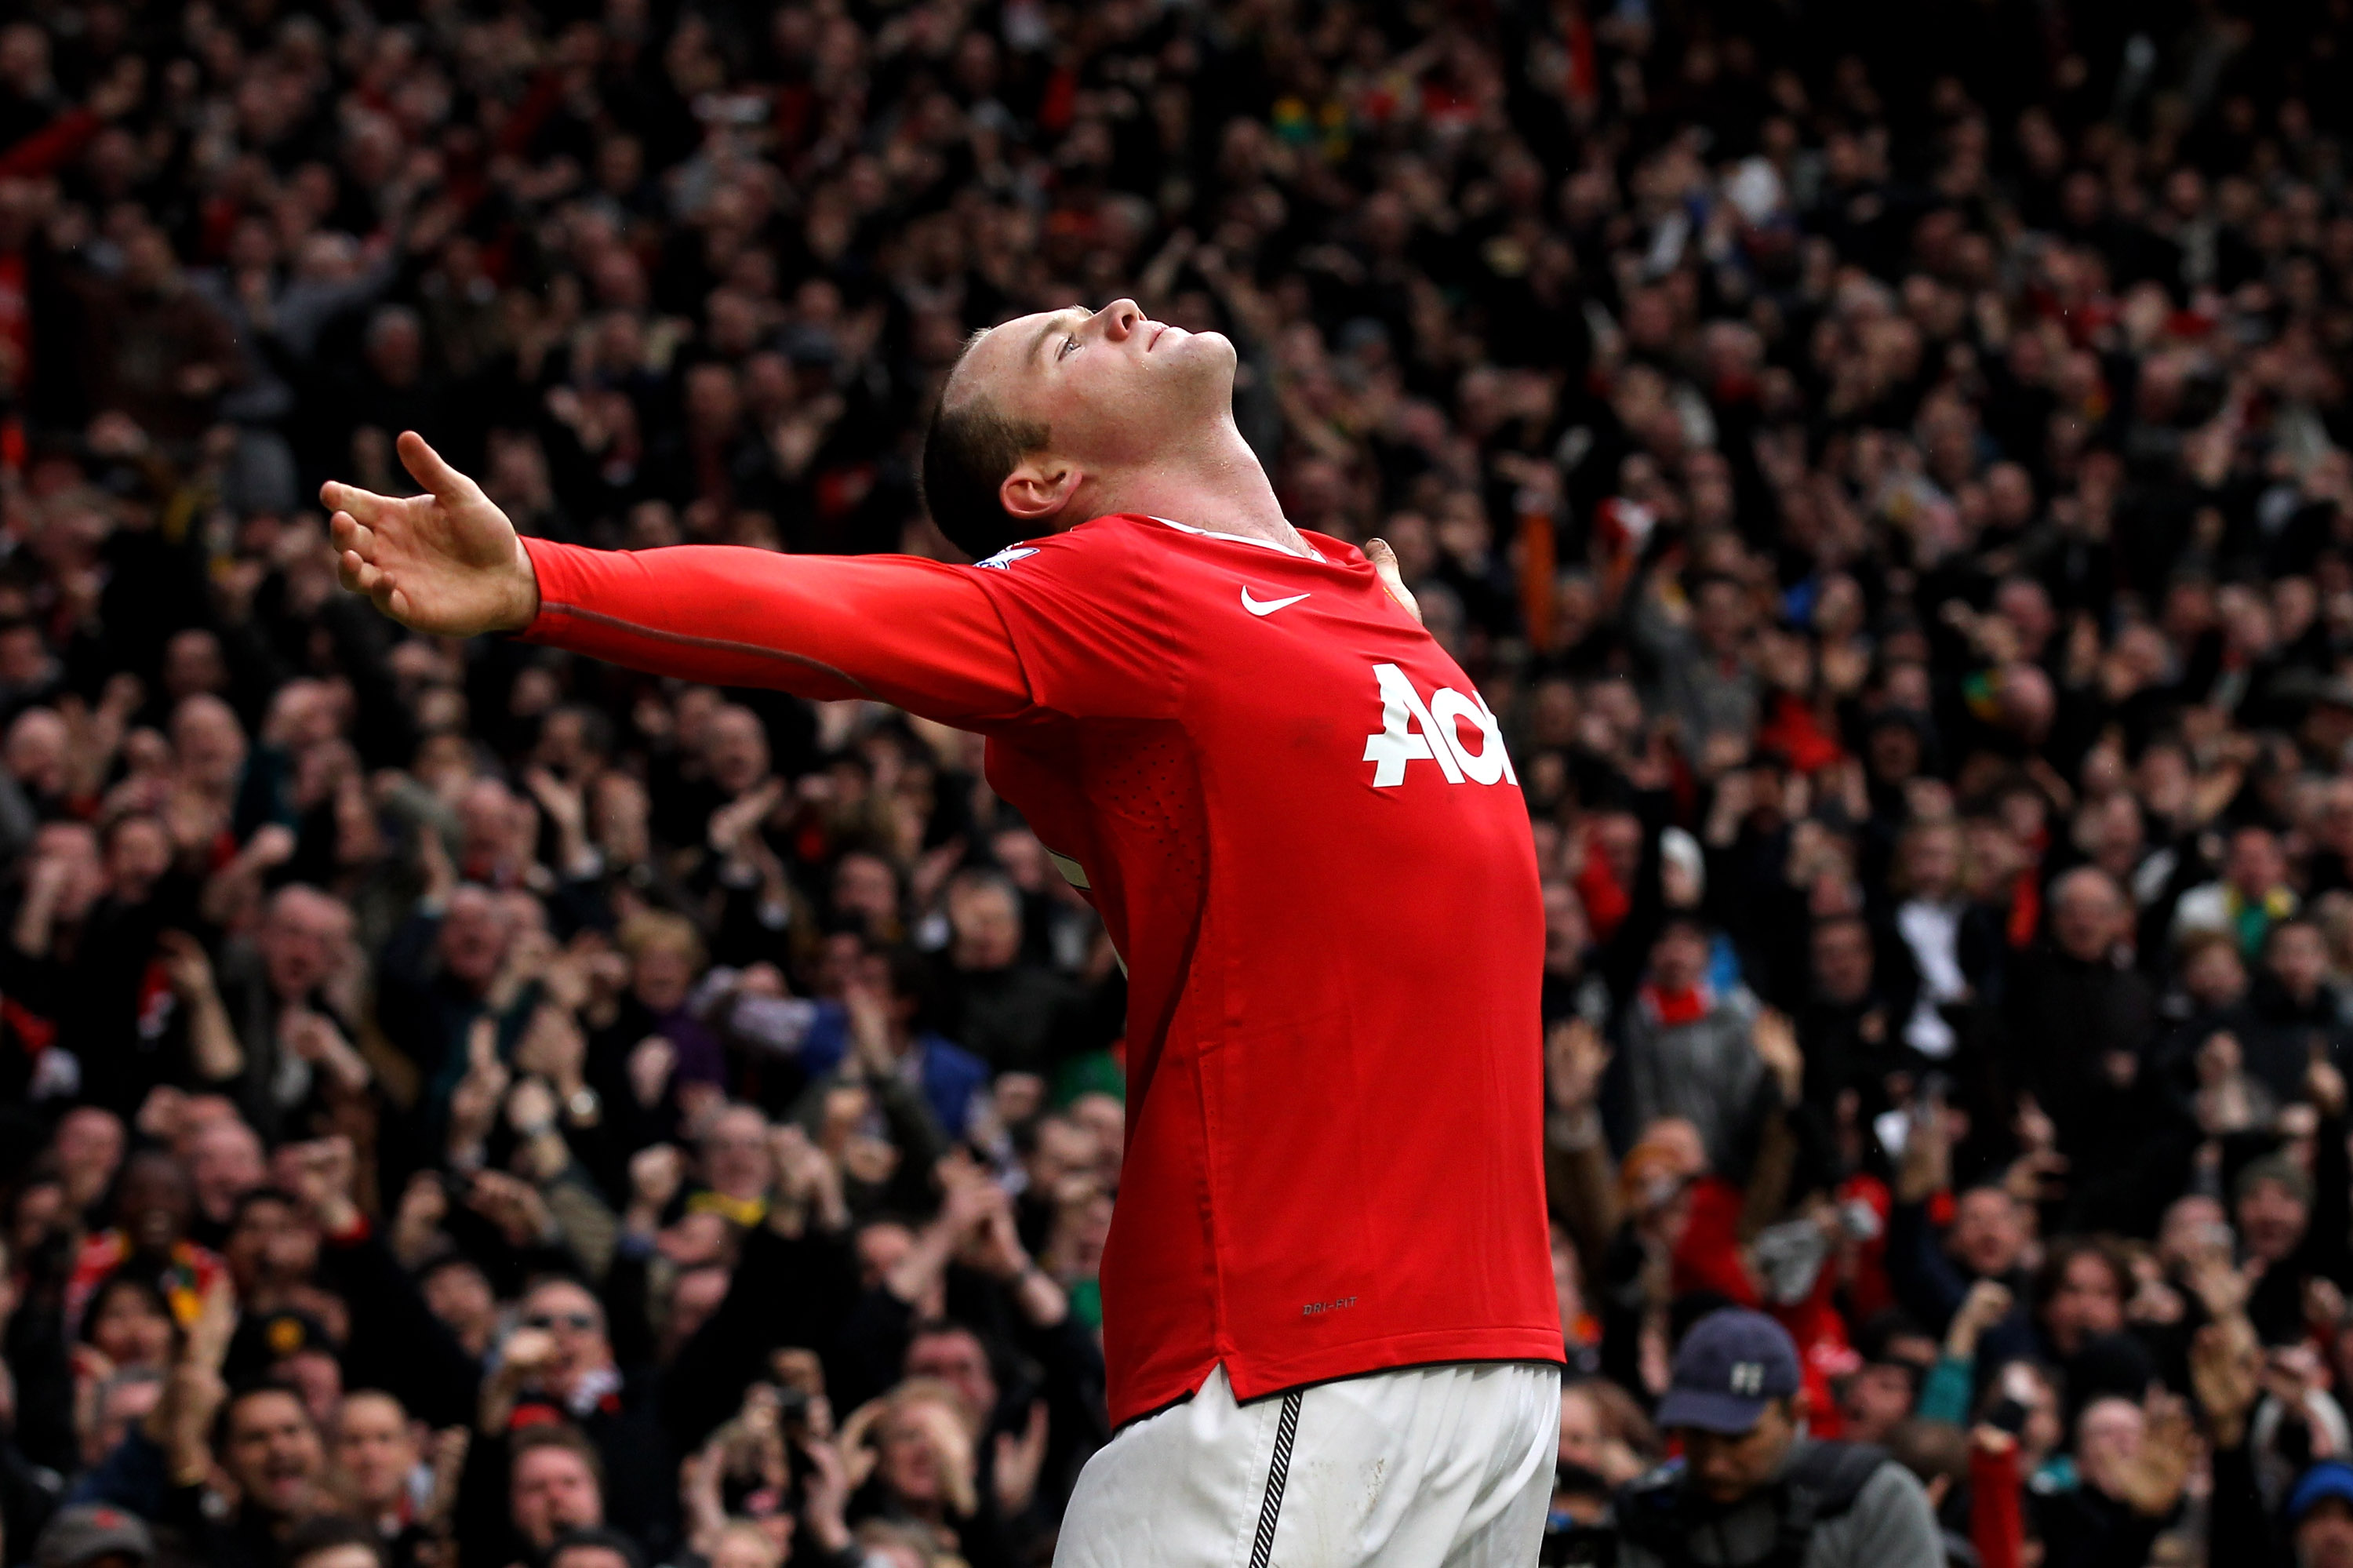 MANCHESTER, ENGLAND - FEBRUARY 12:  Wayne Rooney of Manchester United celebrates after he scores a goal from an overhead kick during the Barclays Premier League match between Manchester United and Manchester City at Old Trafford on February 12, 2011 in Ma